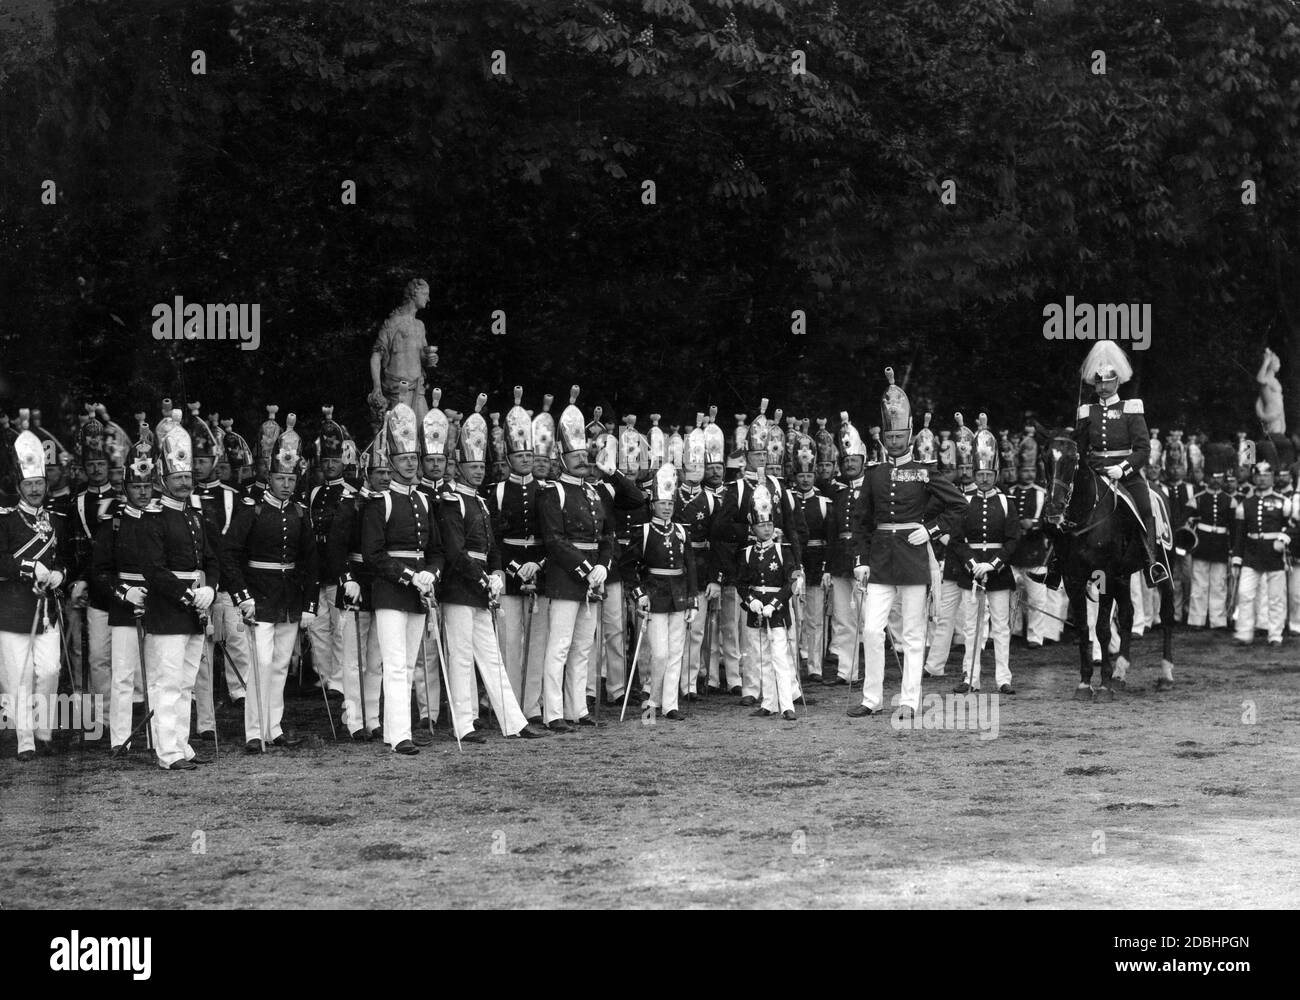 The 1st Foot Guard Regiment. In the middle, the nine-year-old Crown Prince Wilhelm of Prussia and the three sons of Prince Albrecht of Prussia Prince Friedrich Heinrich, Prince Joachim Albrecht and Prince Freidrich Wilhelm. The four princes wear the collar of the Order of the Black Eagle. Stock Photo